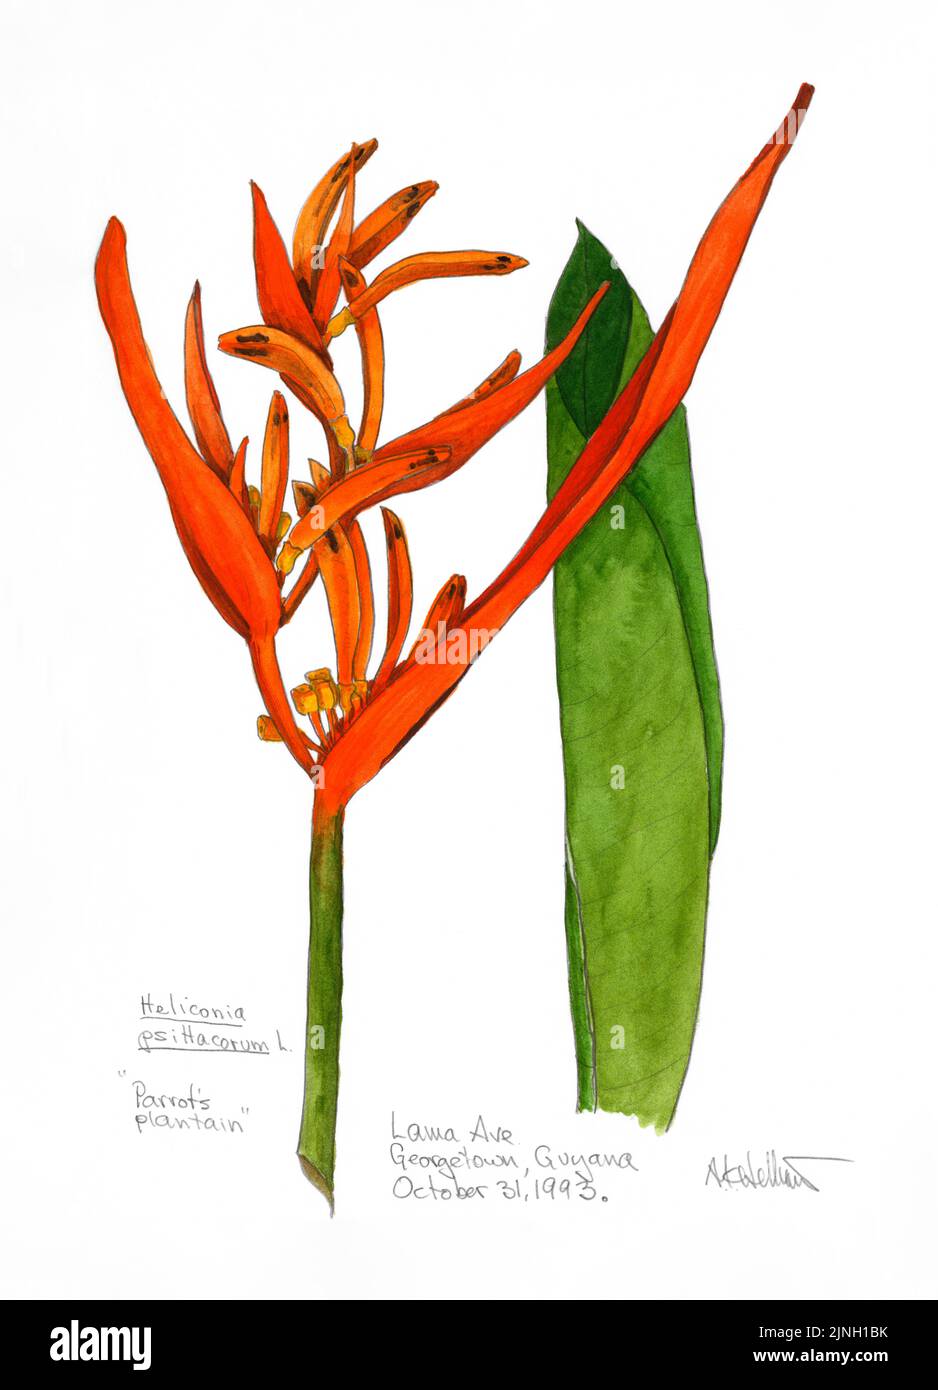 'Parrot's plantain' Heliconia psittacorum, L. painted by A. Kåre Hellum at Georgetown, Guyana October 31, 1993 Stock Photo